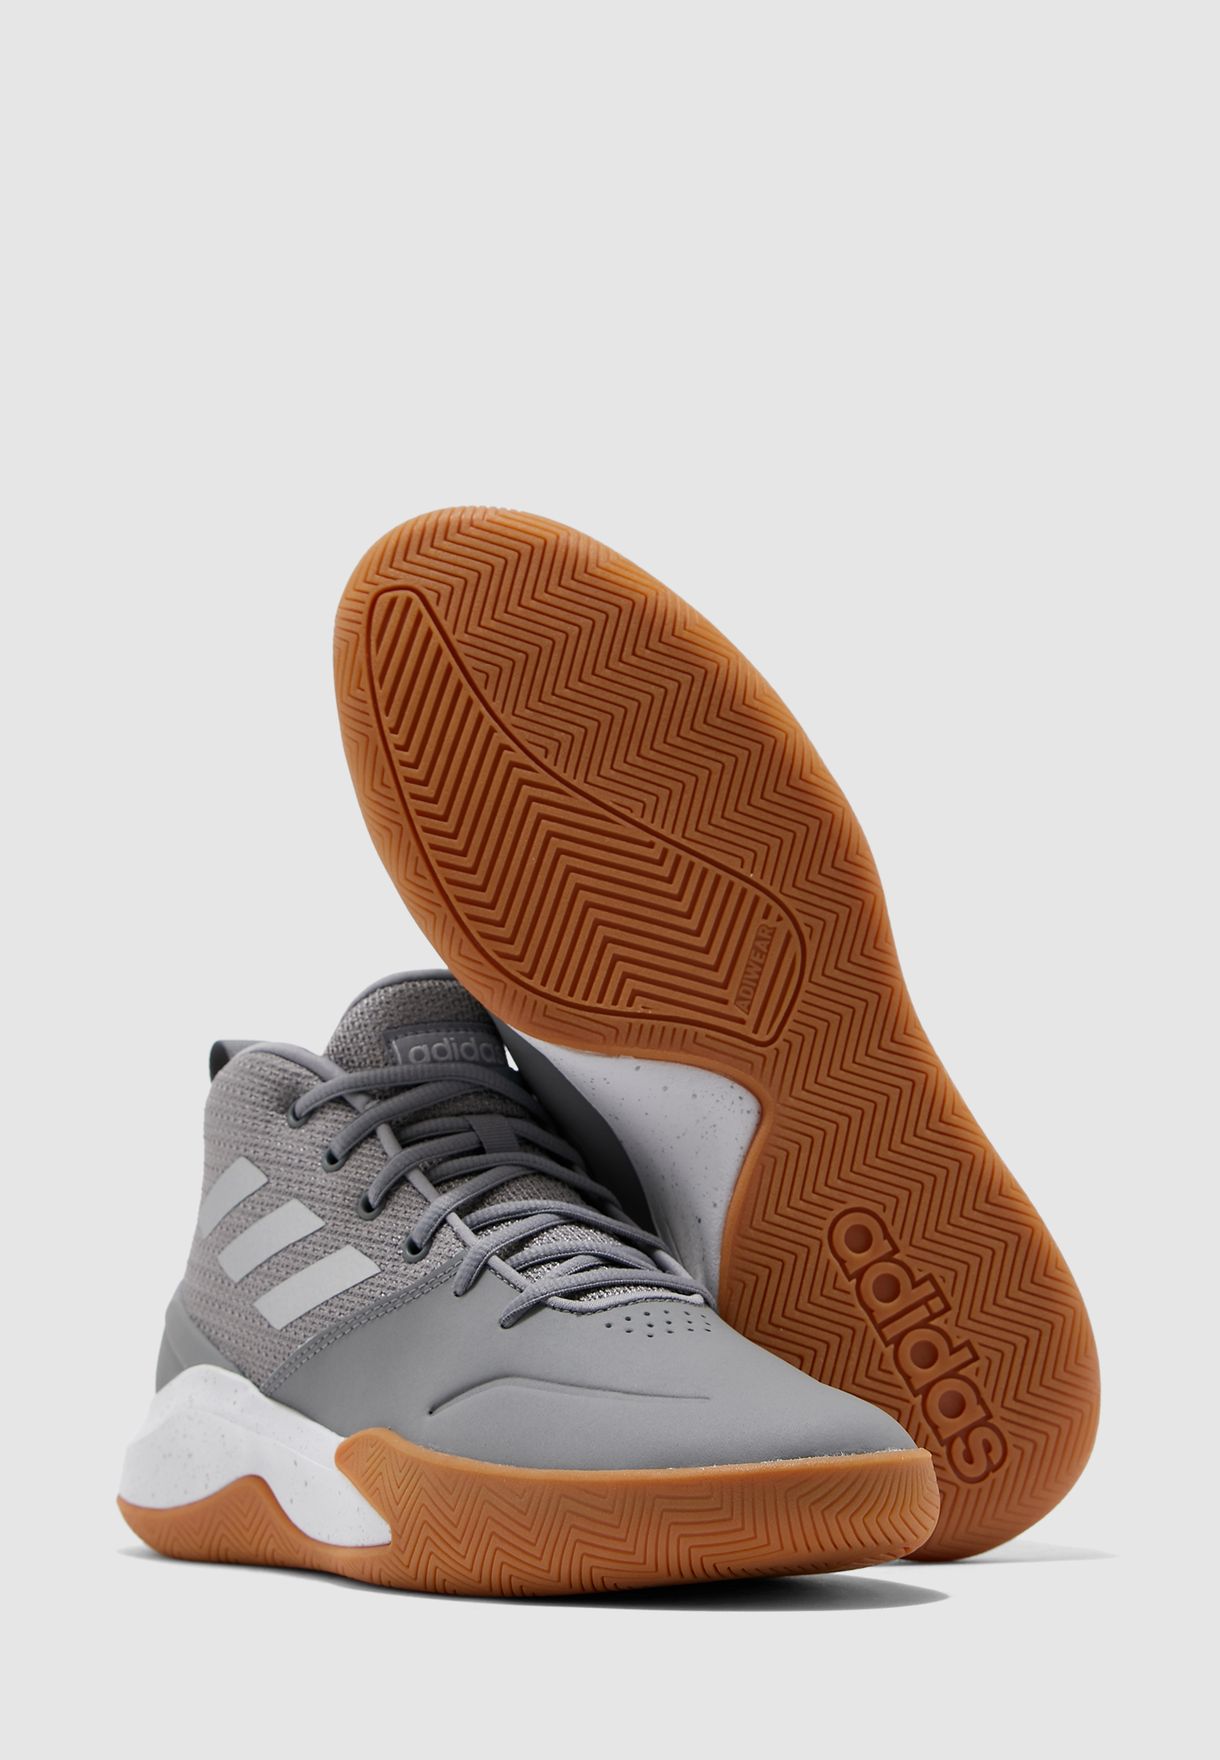 adidas own the game grey